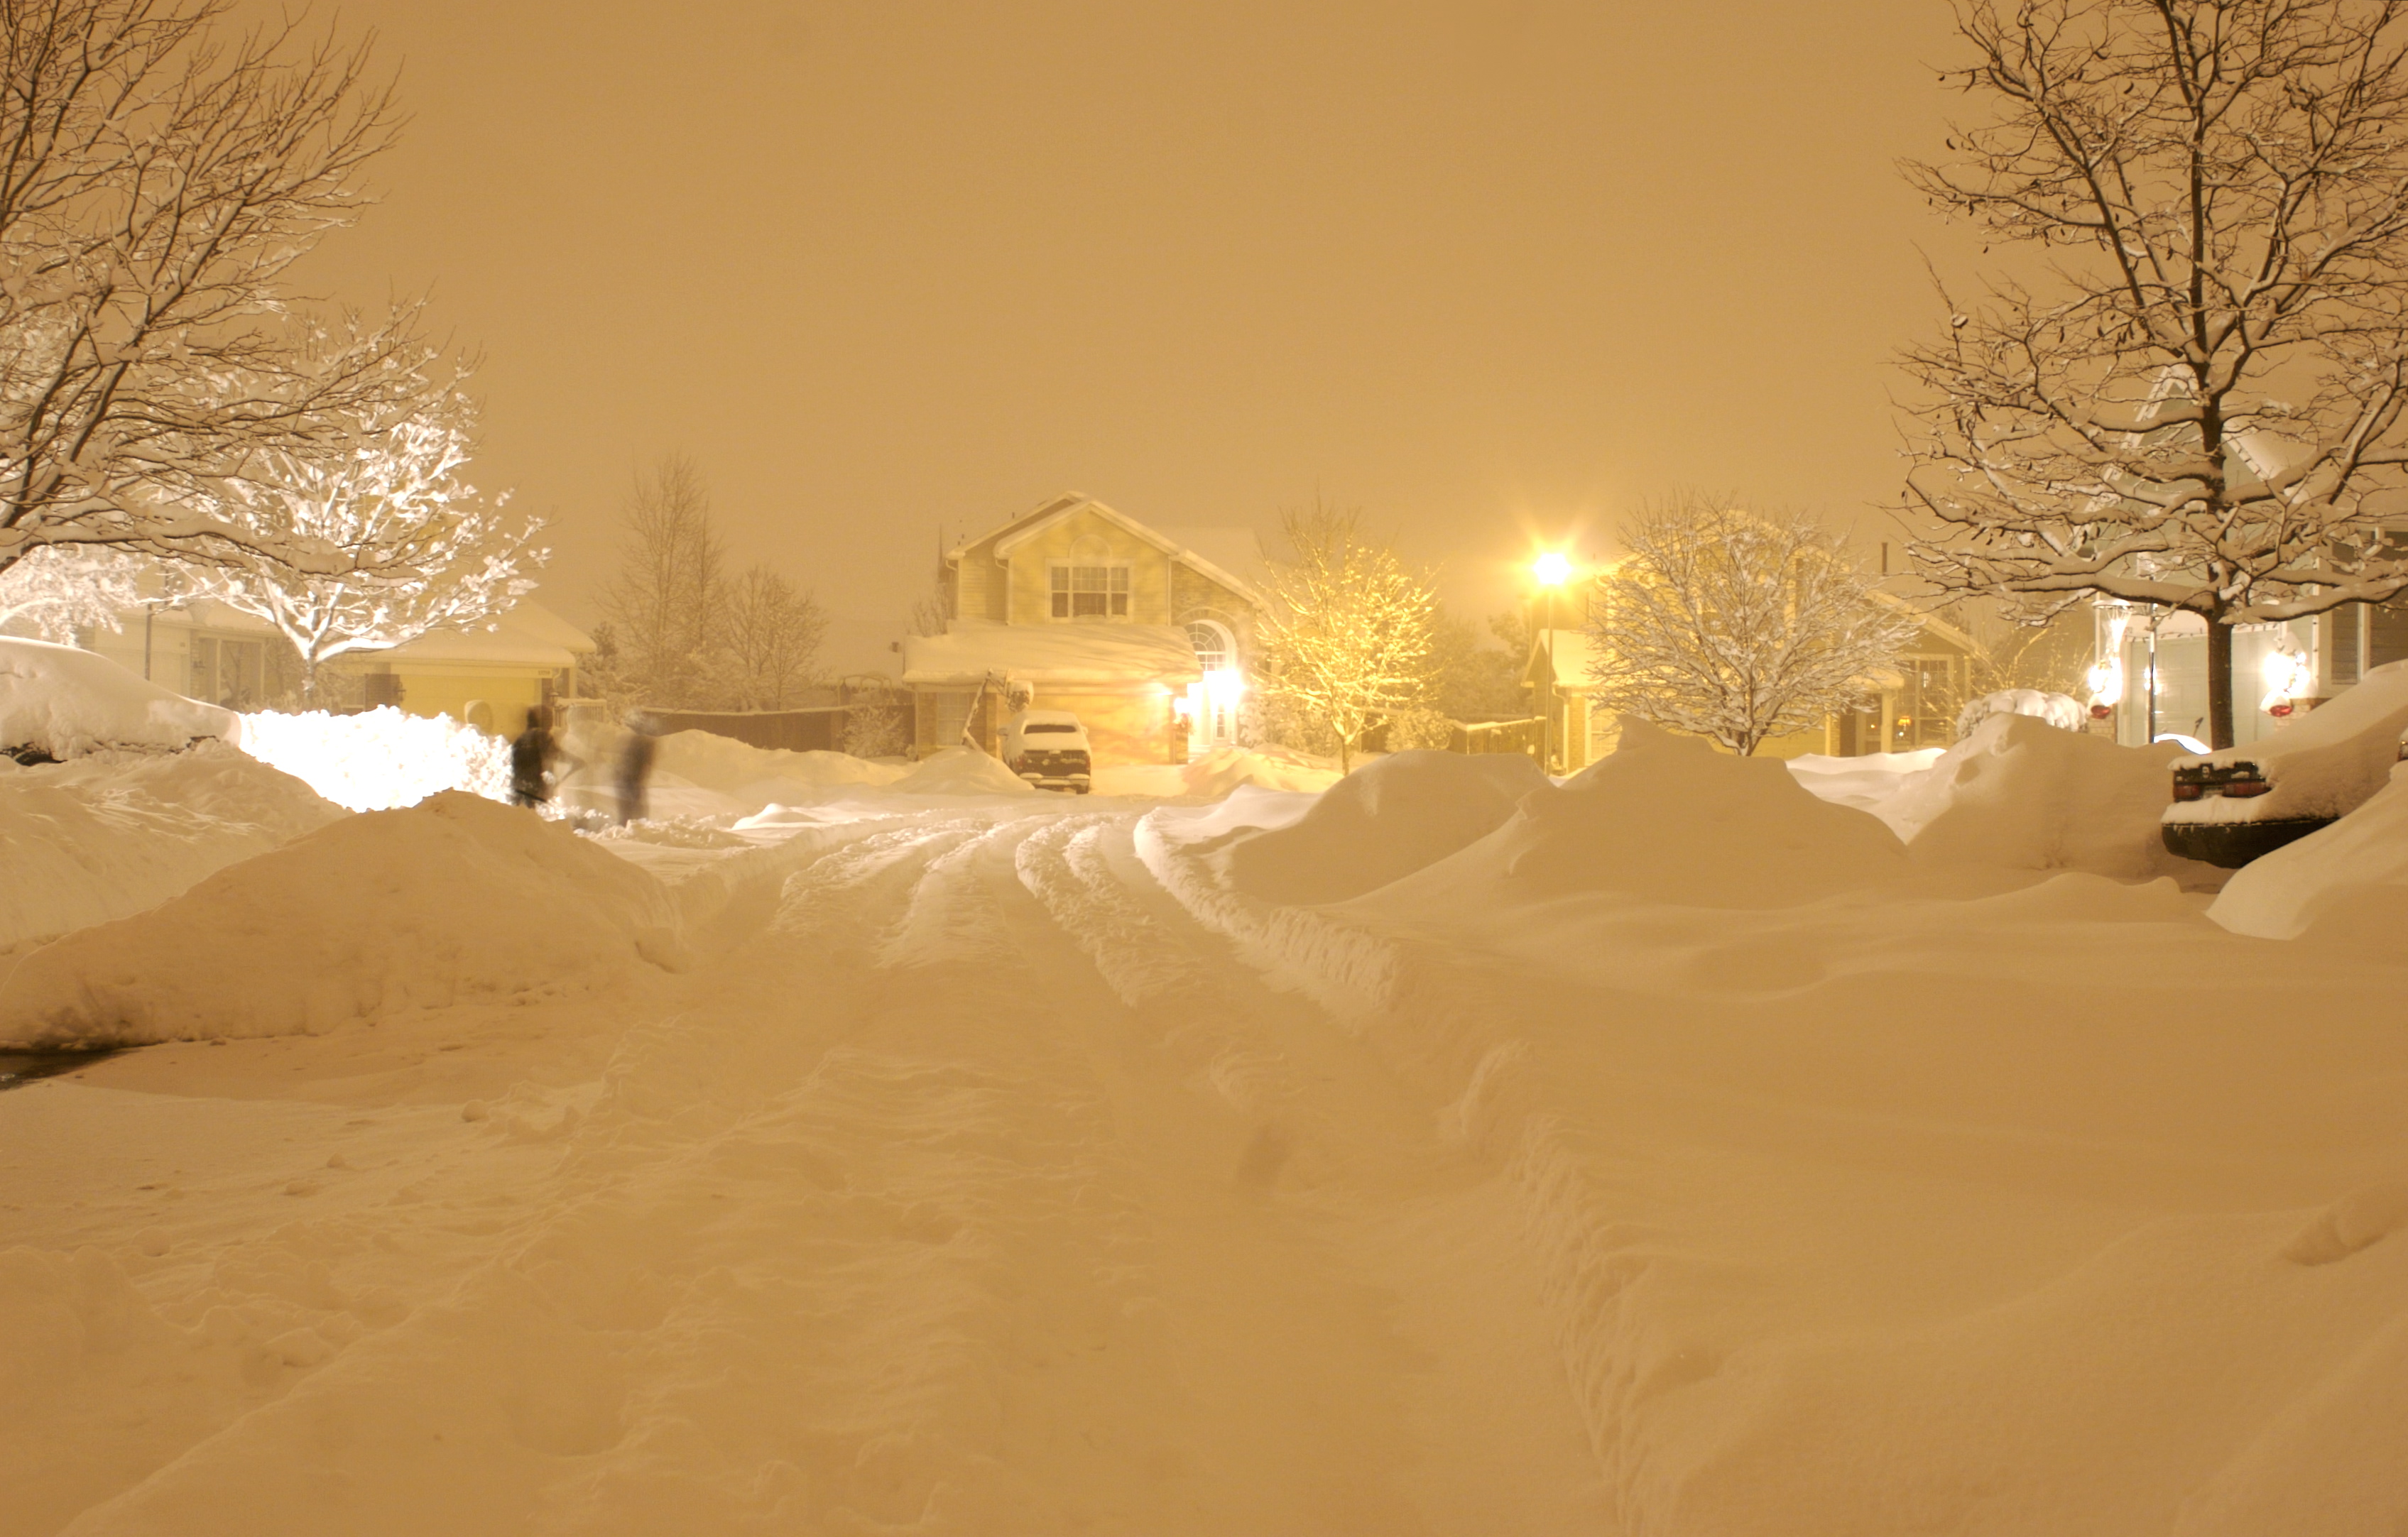 My Parents' Street in the 2006 Blizzard